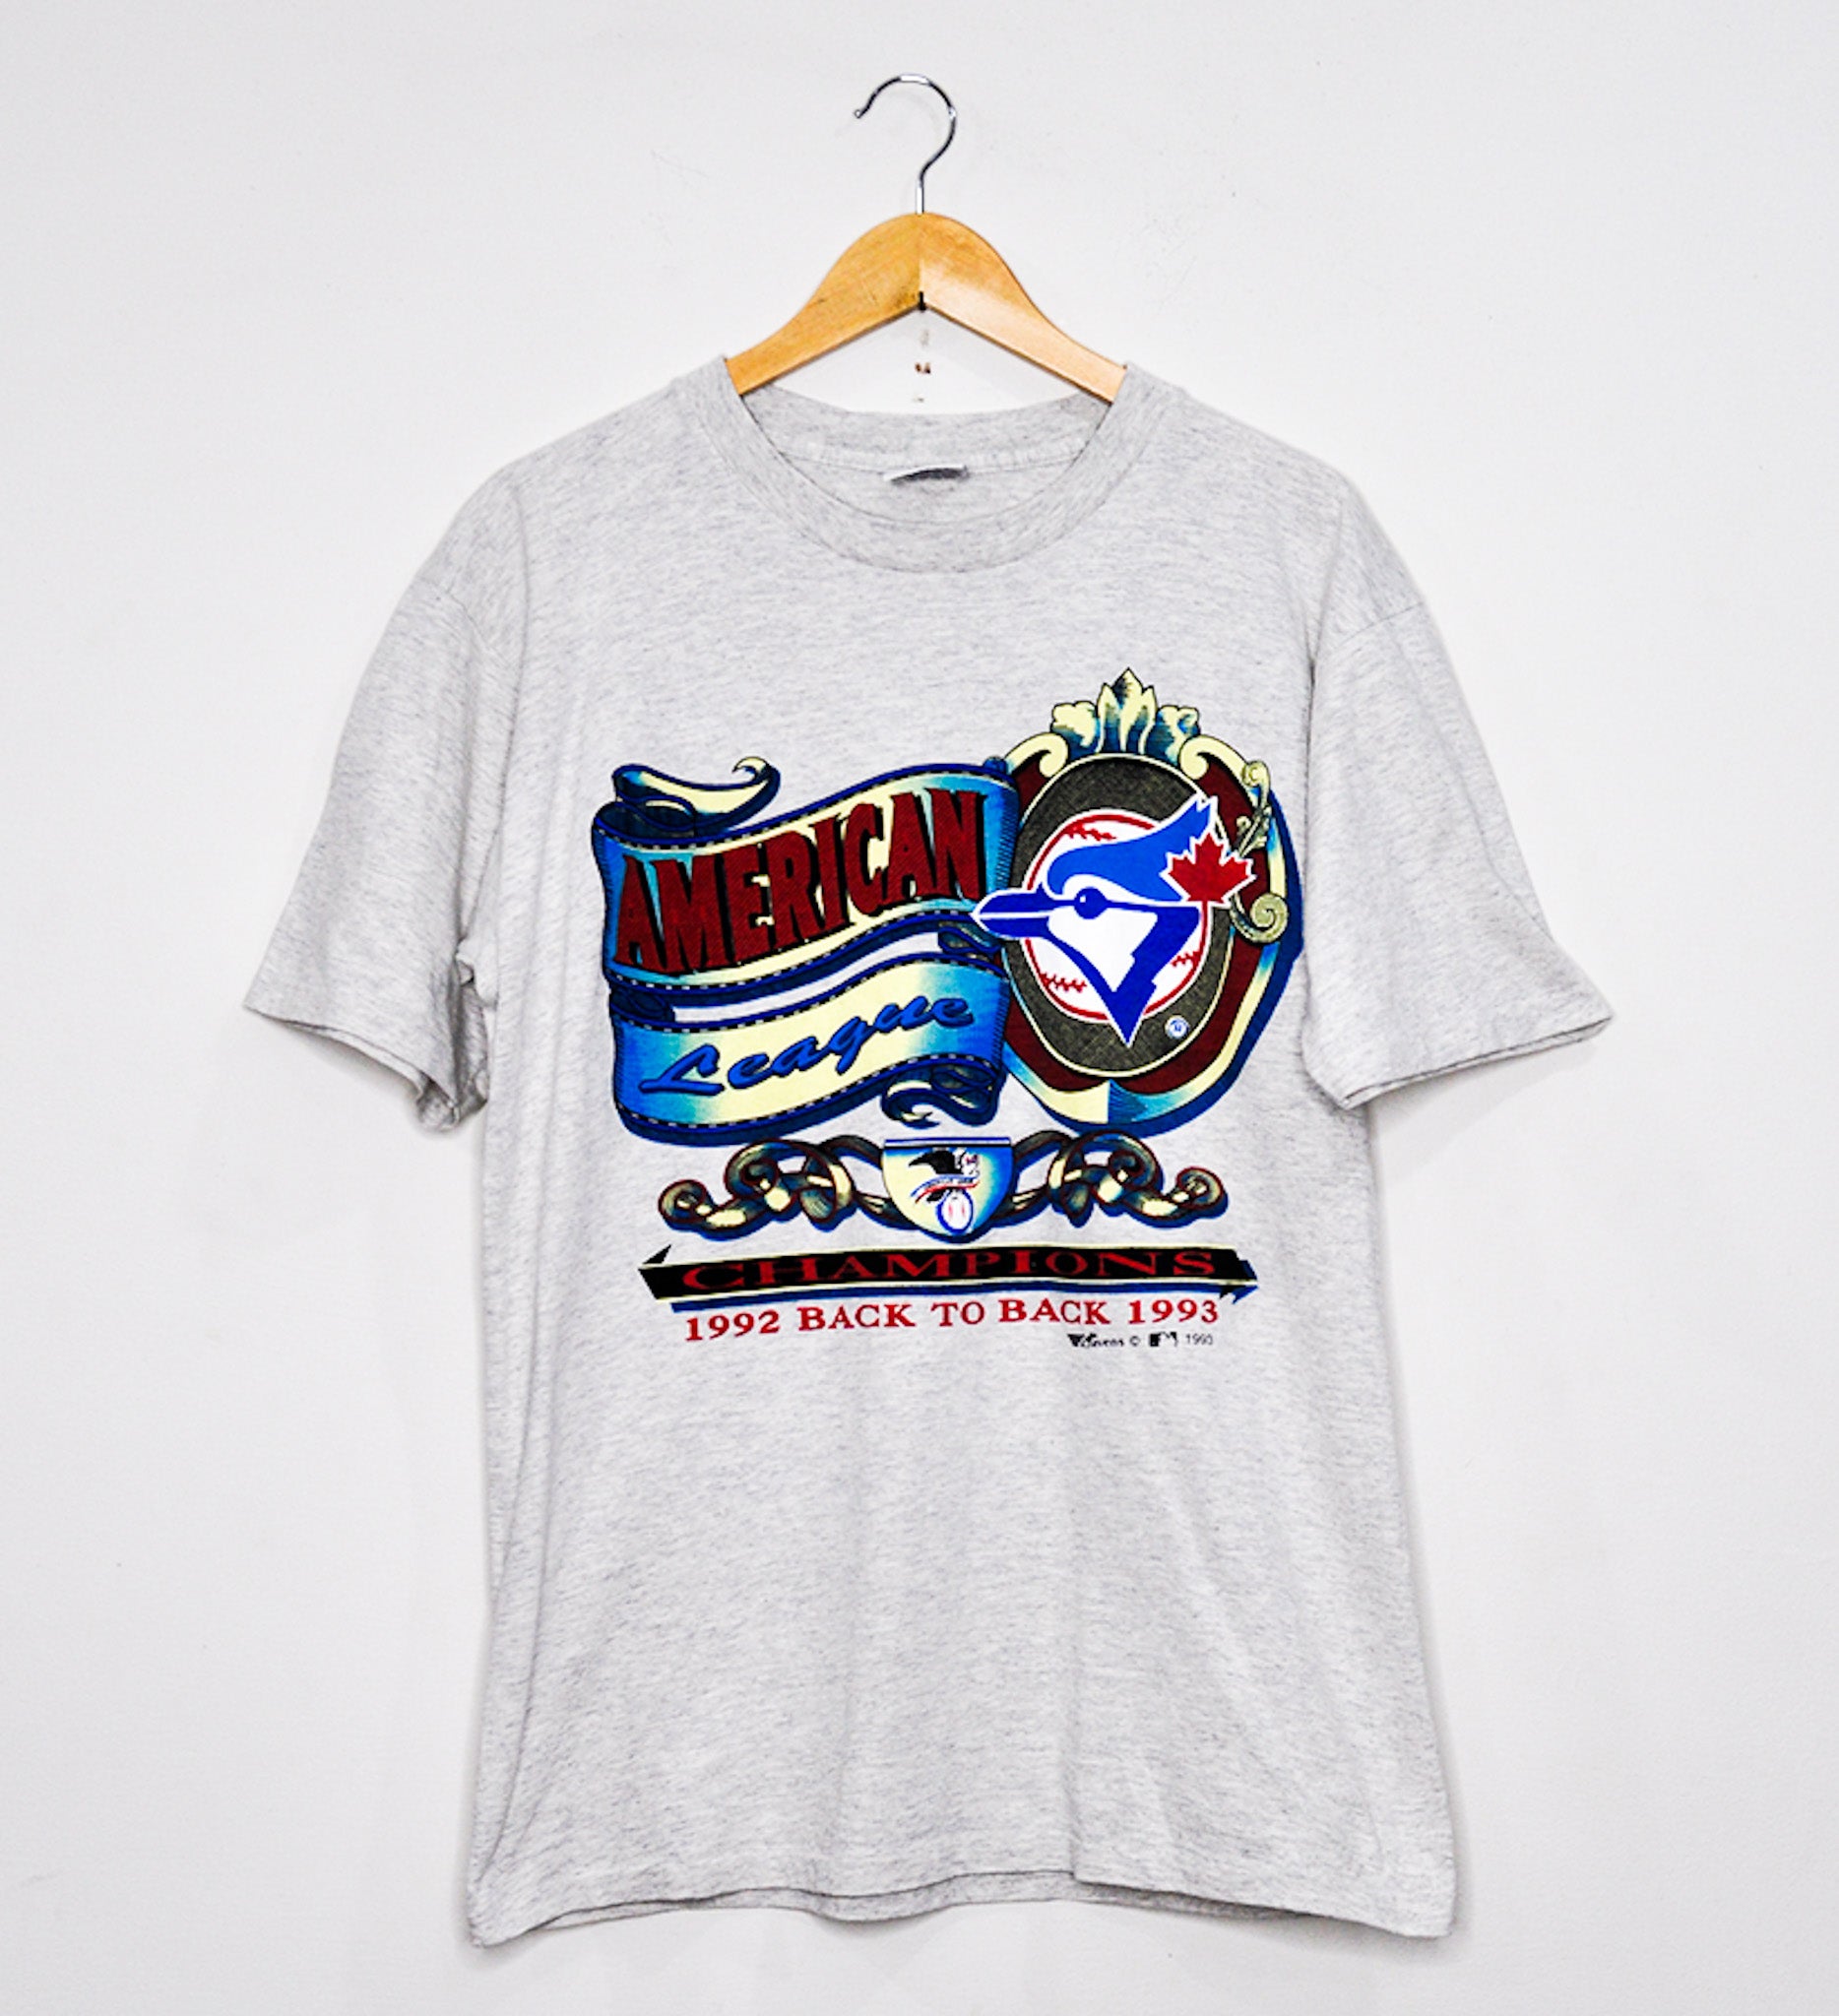 TORONTO BLUE JAYS "Back to Back American League Champions" TEE